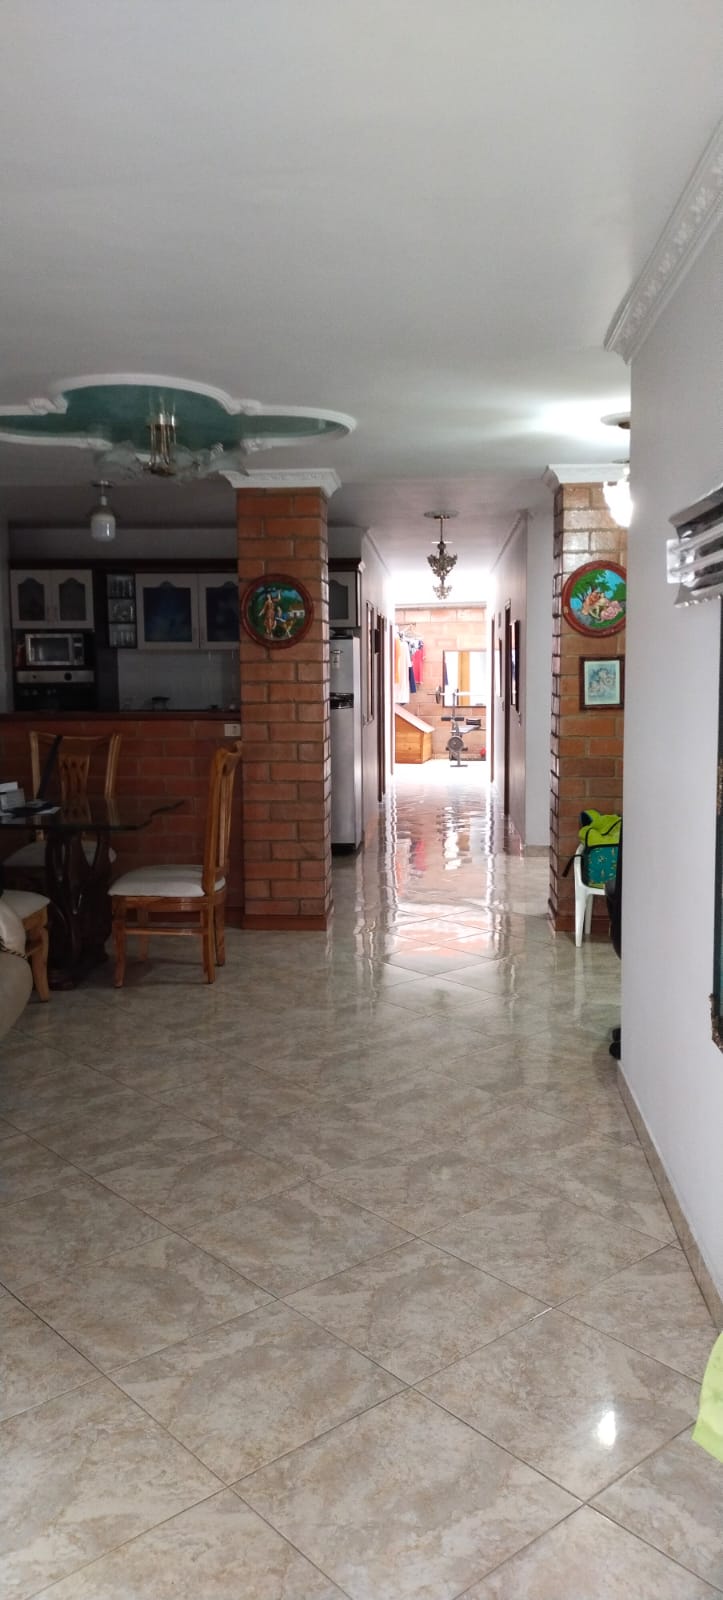 Local Living, Low Cost, No HOA Fee 1582 sq ft Apartment Located in the City Center of Medellin